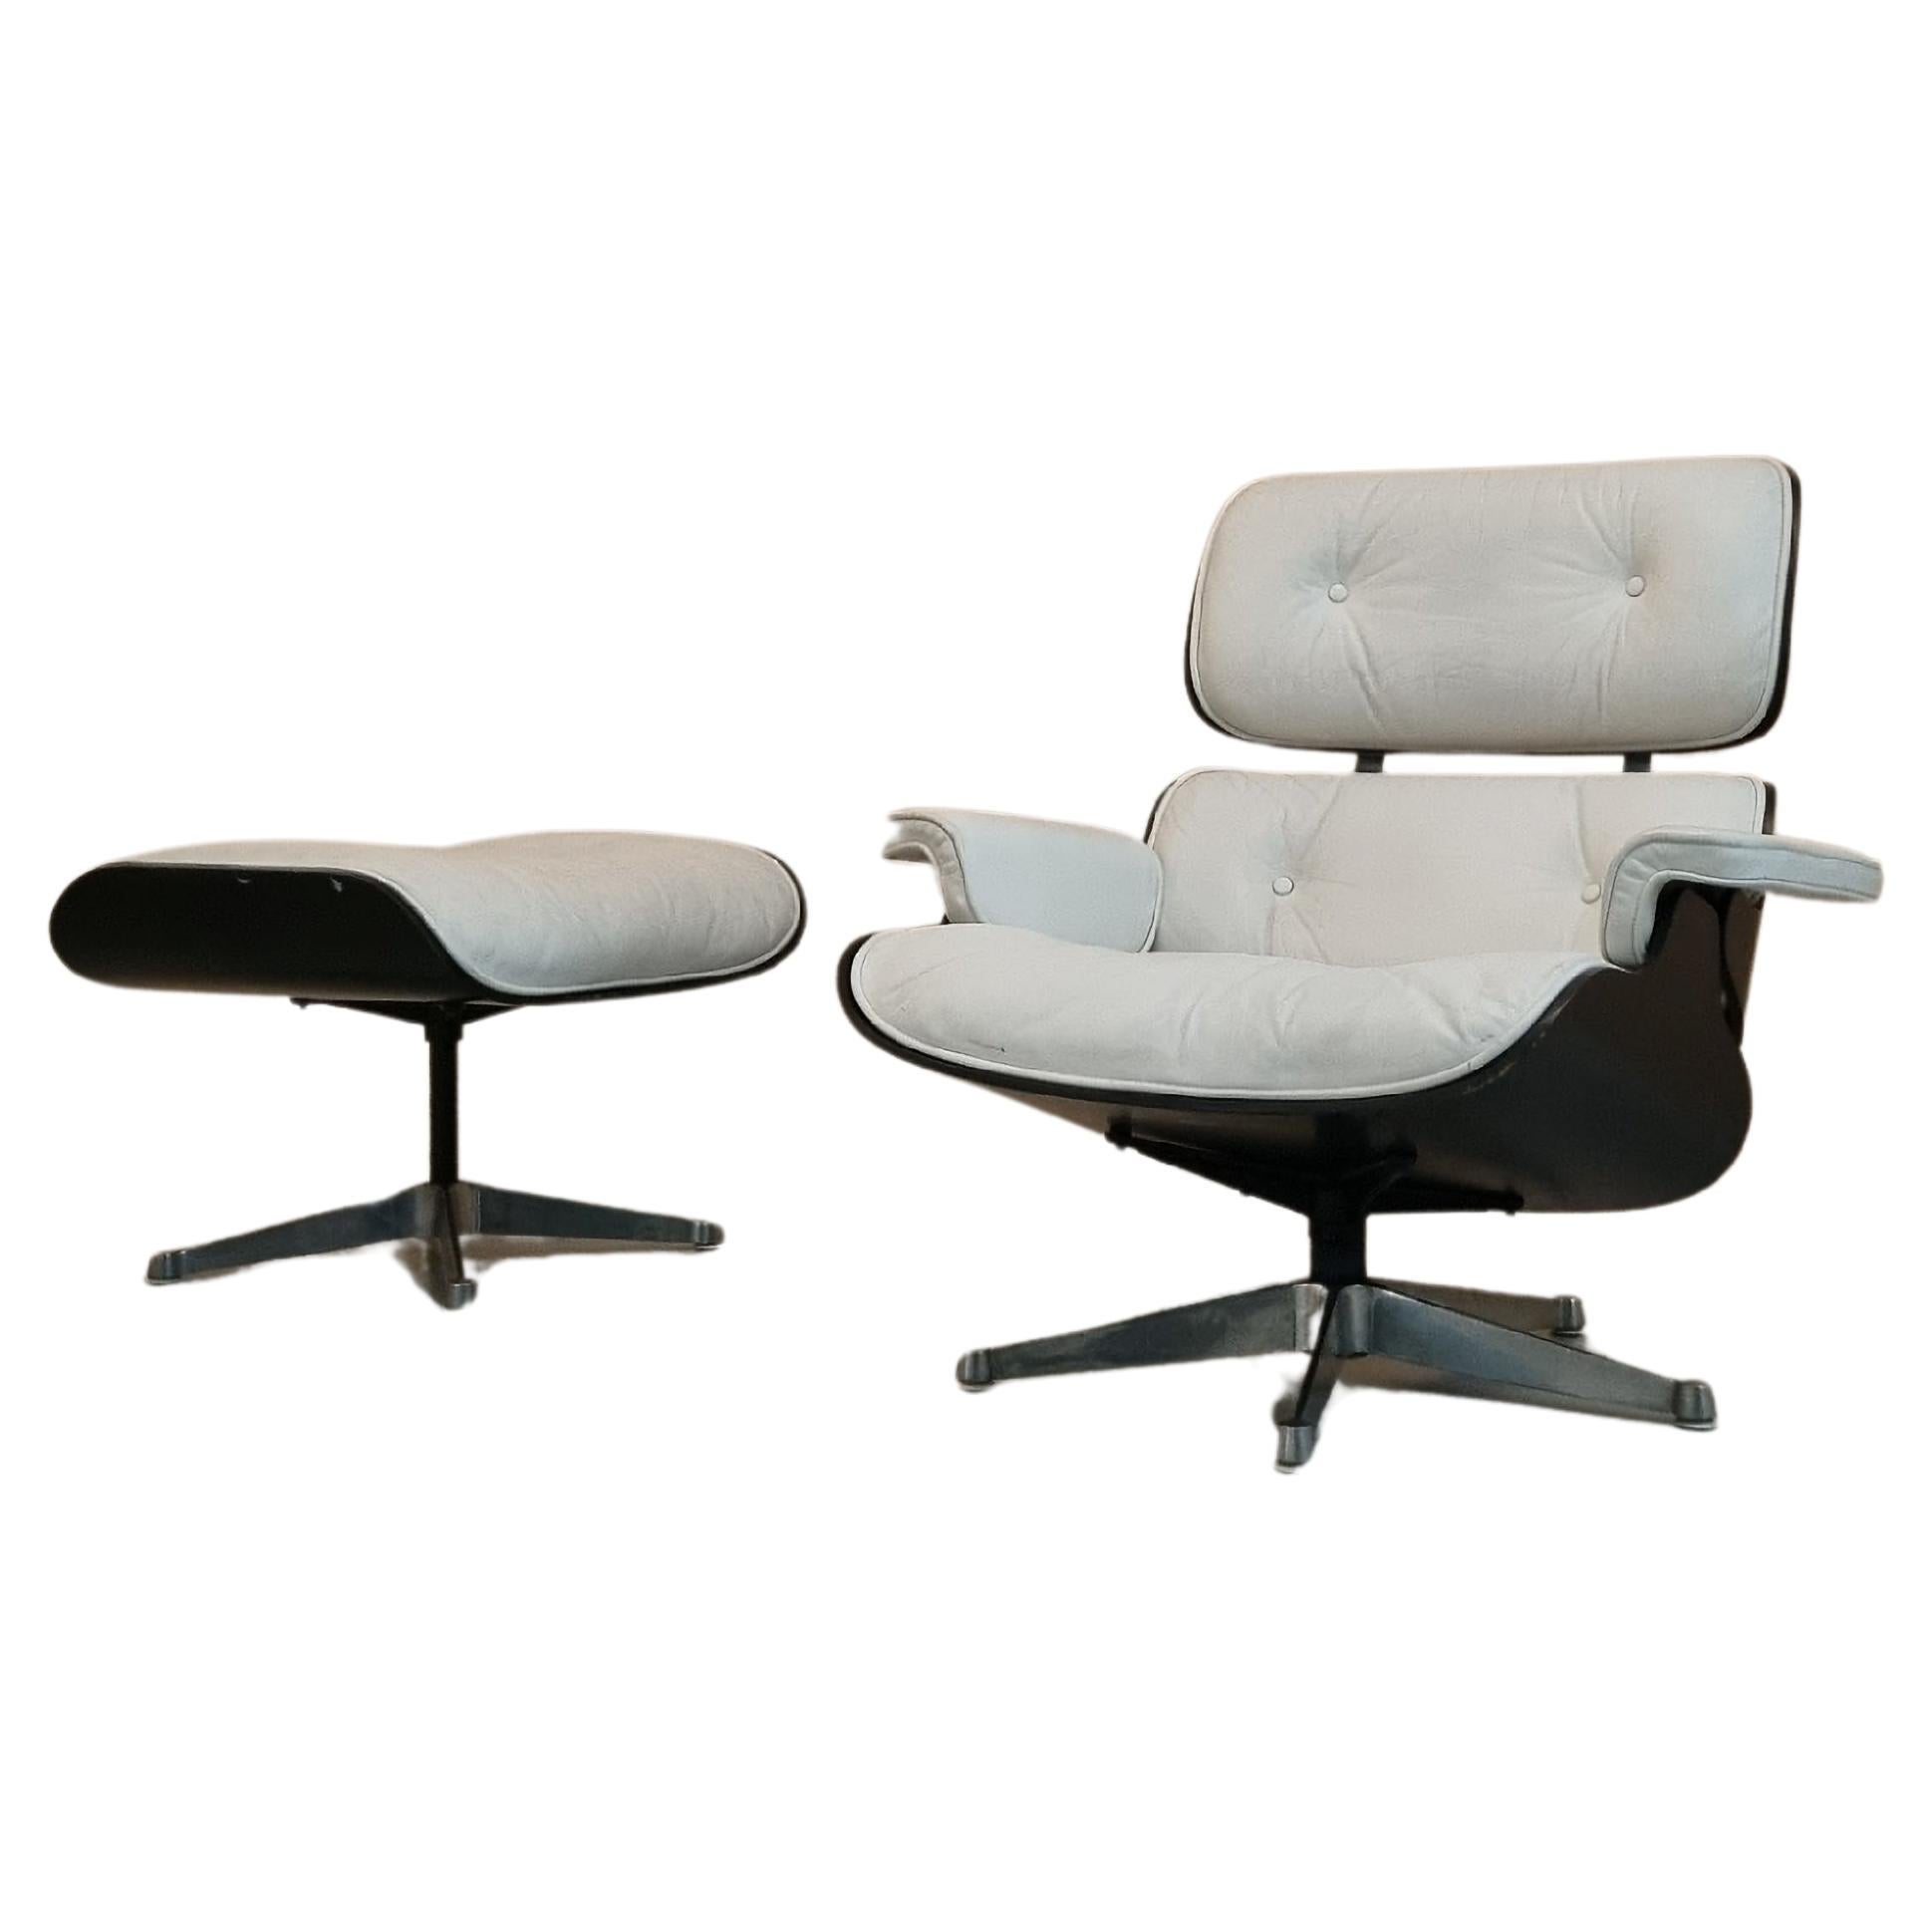 Eames 670 Lounge chair and 671 ottoman designed by Charles and Ray Eames for ICF